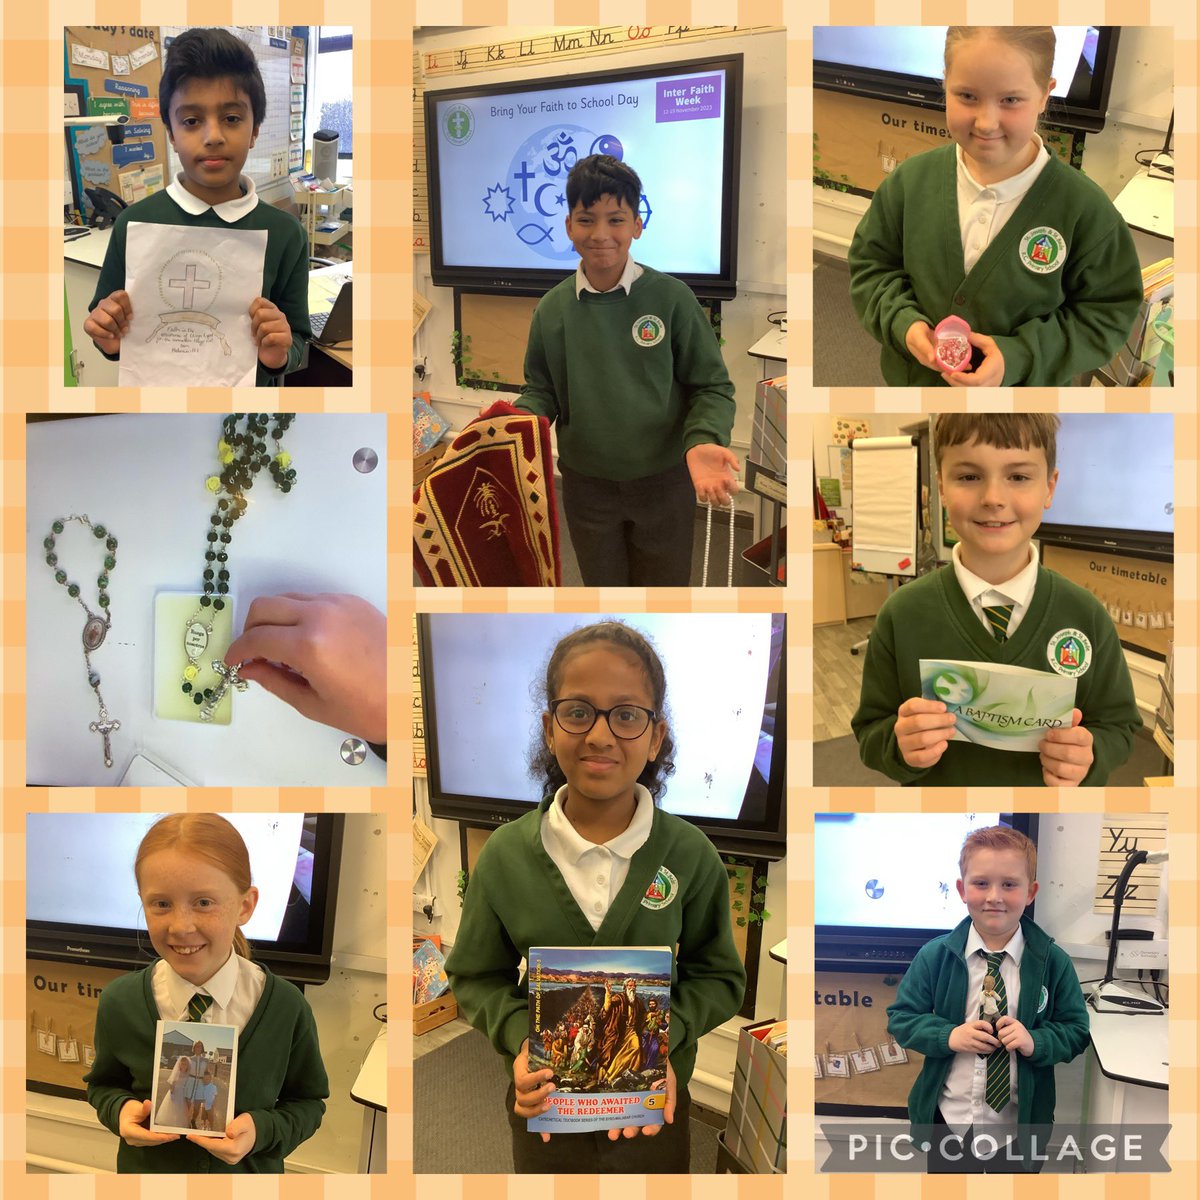 Thank you to the children who shared items from their faith in Bring Your Faith to School Day. It was especially lovely to find out more about Islam and how muslims use a prayer mat and prayer beads. ✝️☪️ #InterFaithWeek #sjsbRE